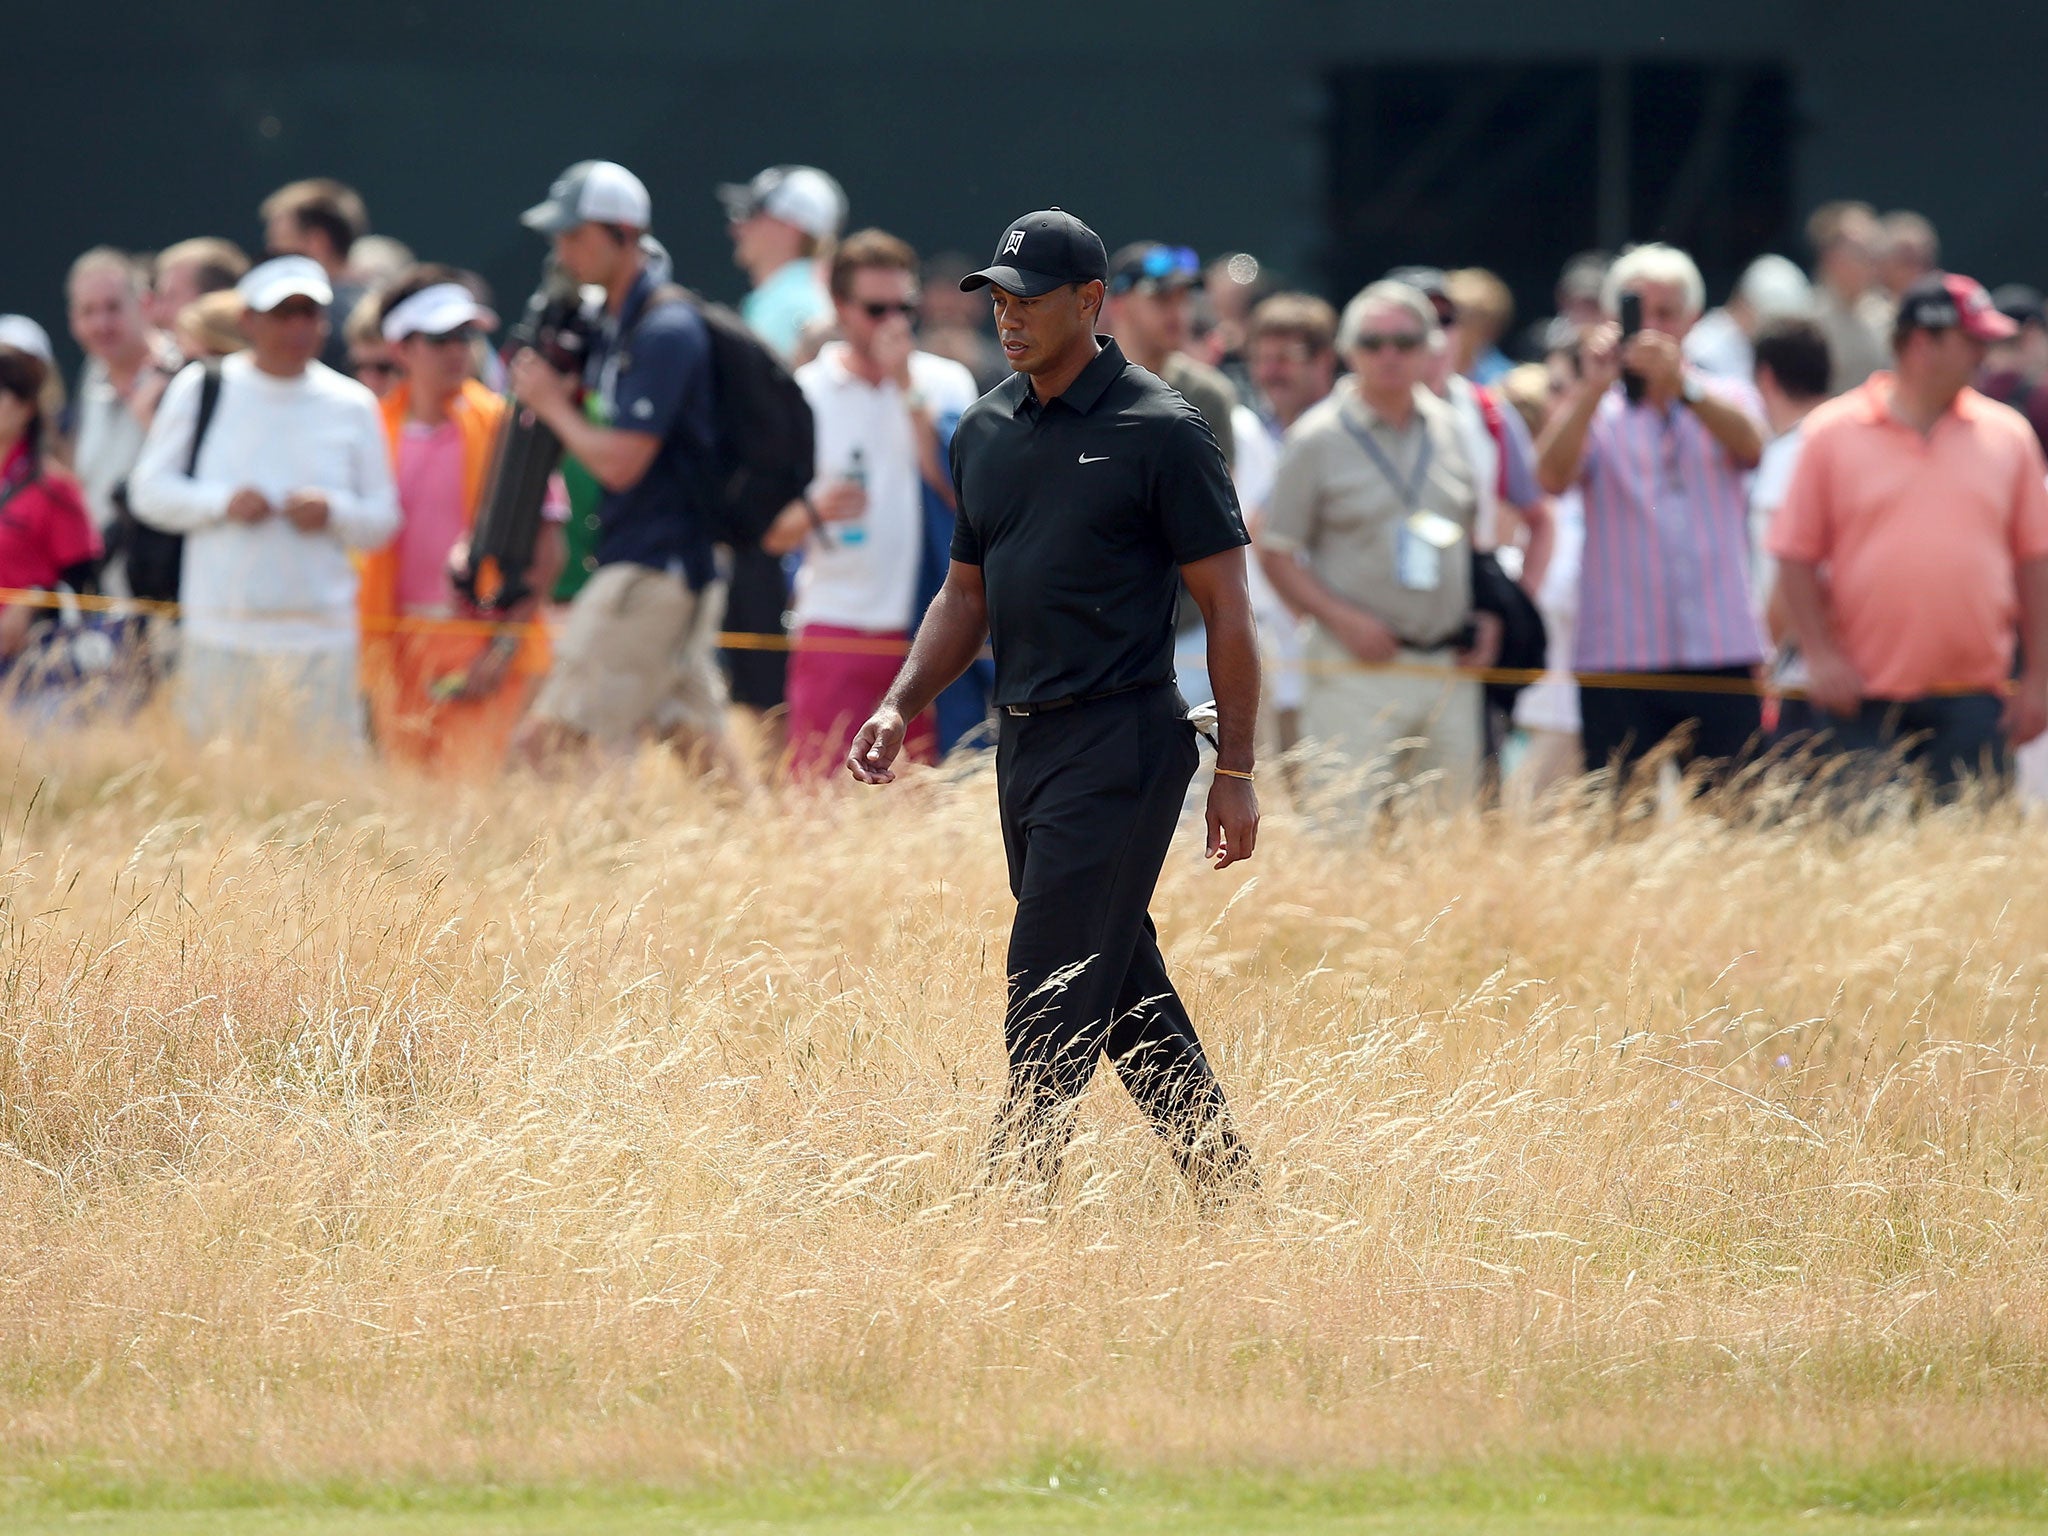 Tiger Woods goes searching for his ball in the rough after a stray drive on the first hole of the day